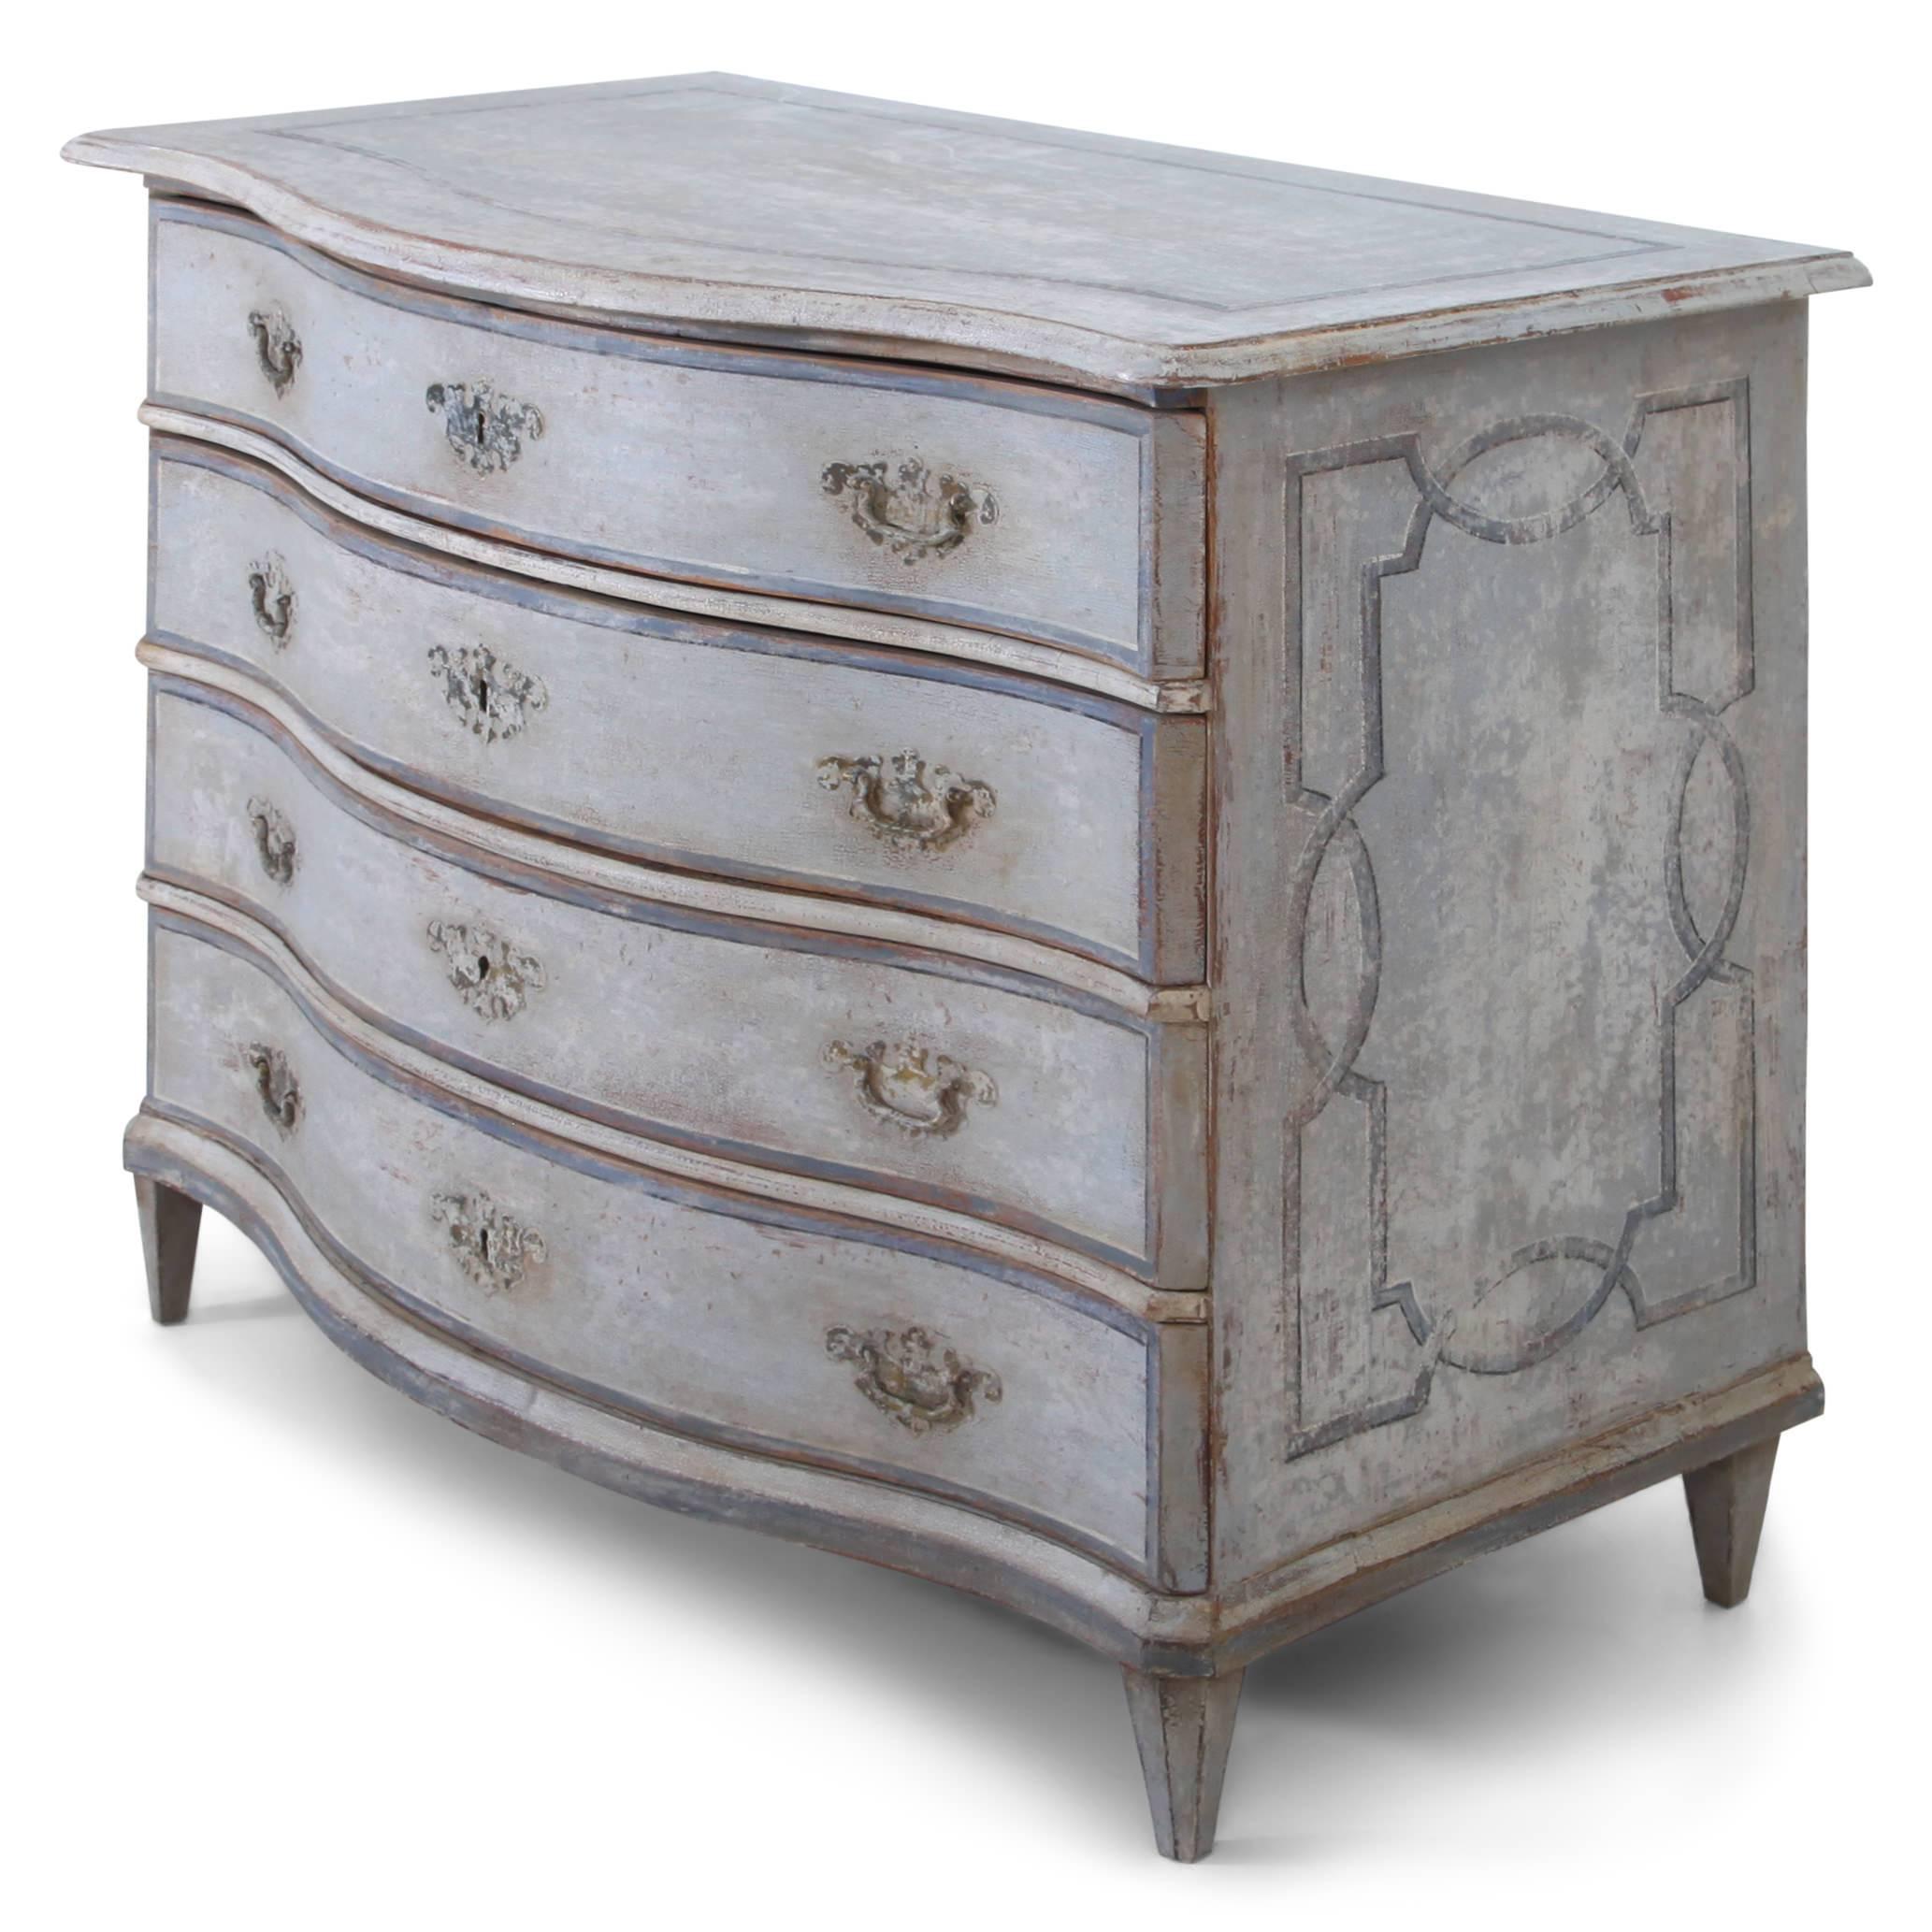 Four-drawered Baroque chest of drawers on tapered feet with a serpentine front. The grey paint with blue accents is new and has a decorative worn look to it.